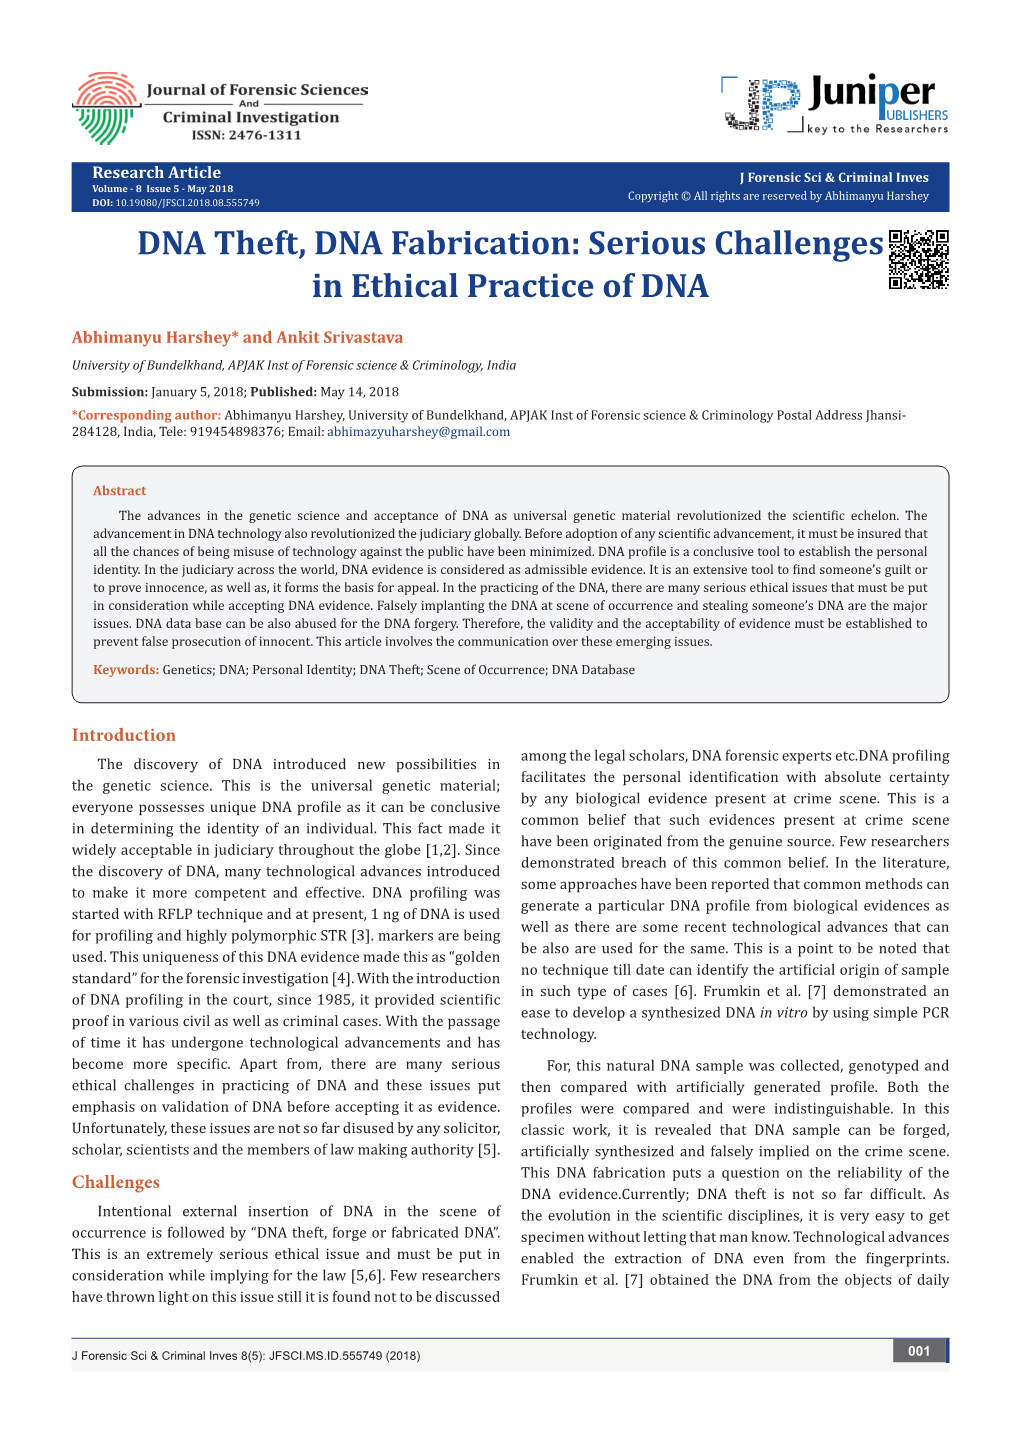 DNA Theft, DNA Fabrication: Serious Challenges in Ethical Practice of DNA